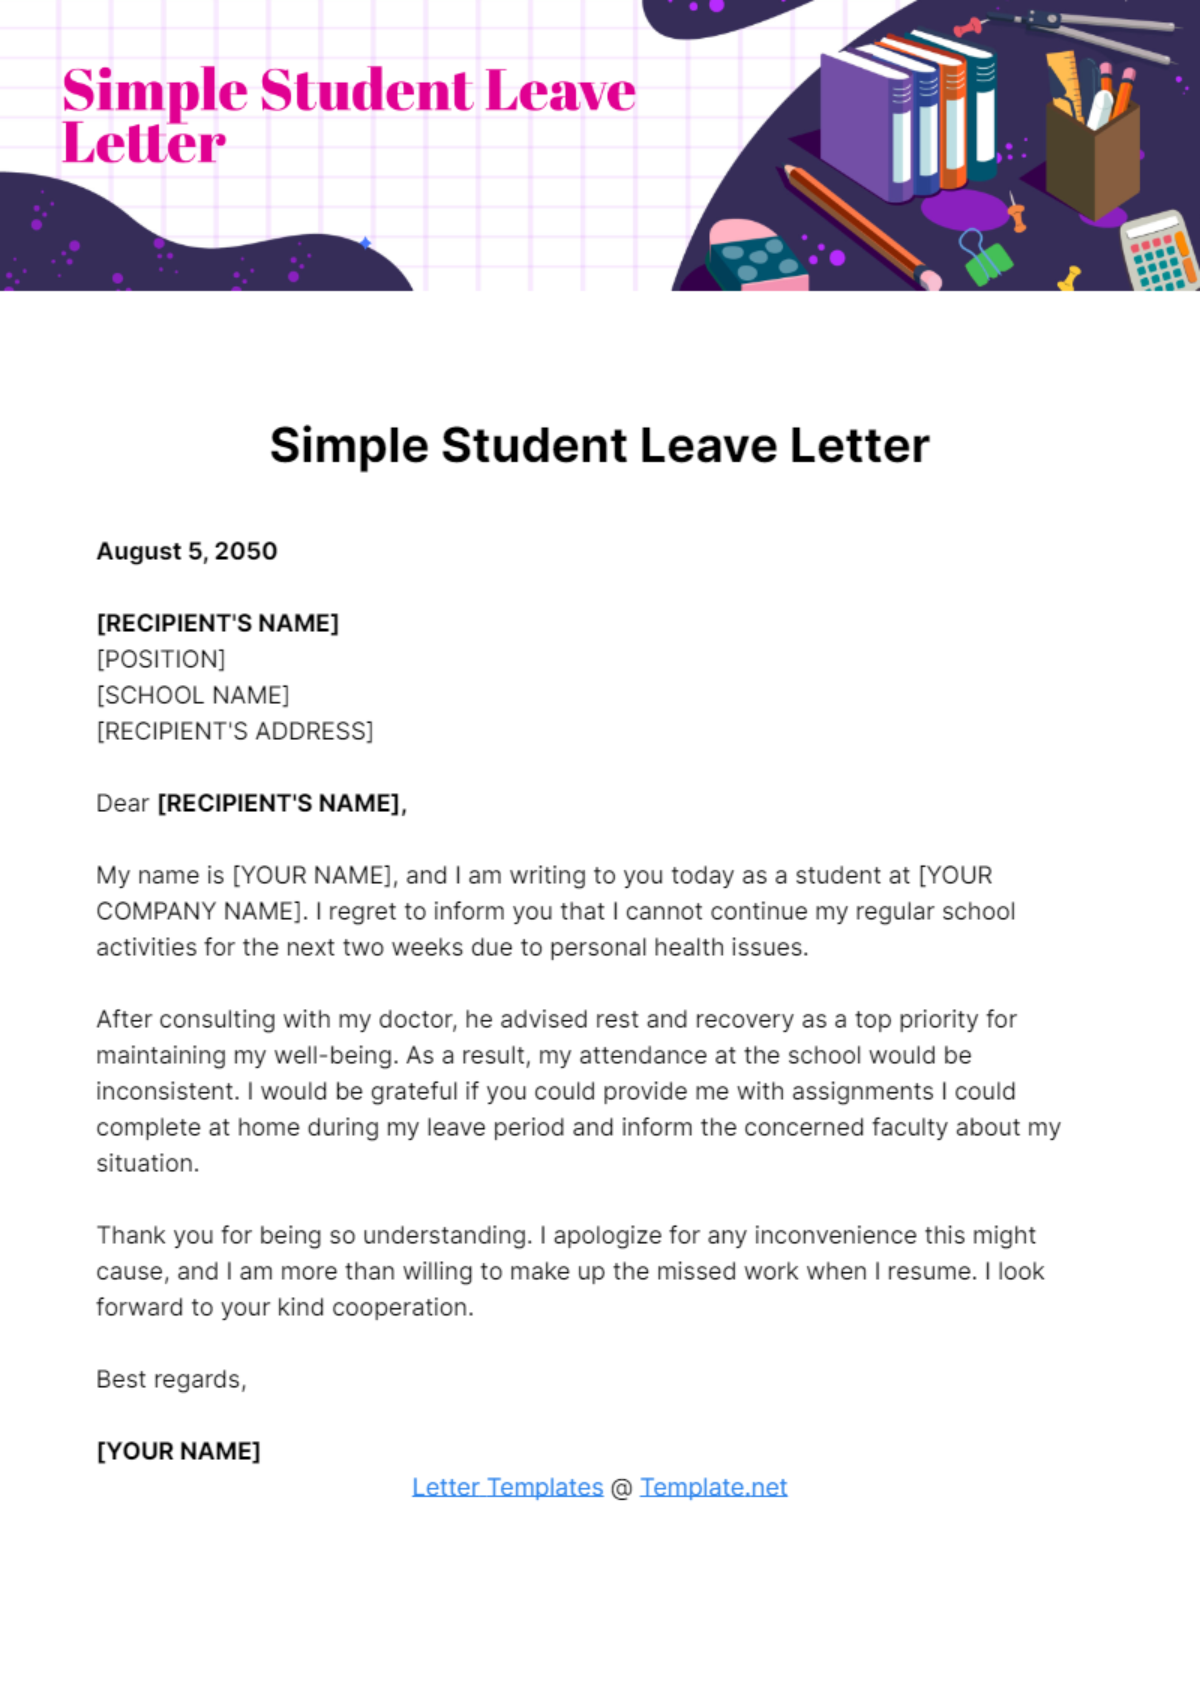 Free Simple Student Leave Letter Template